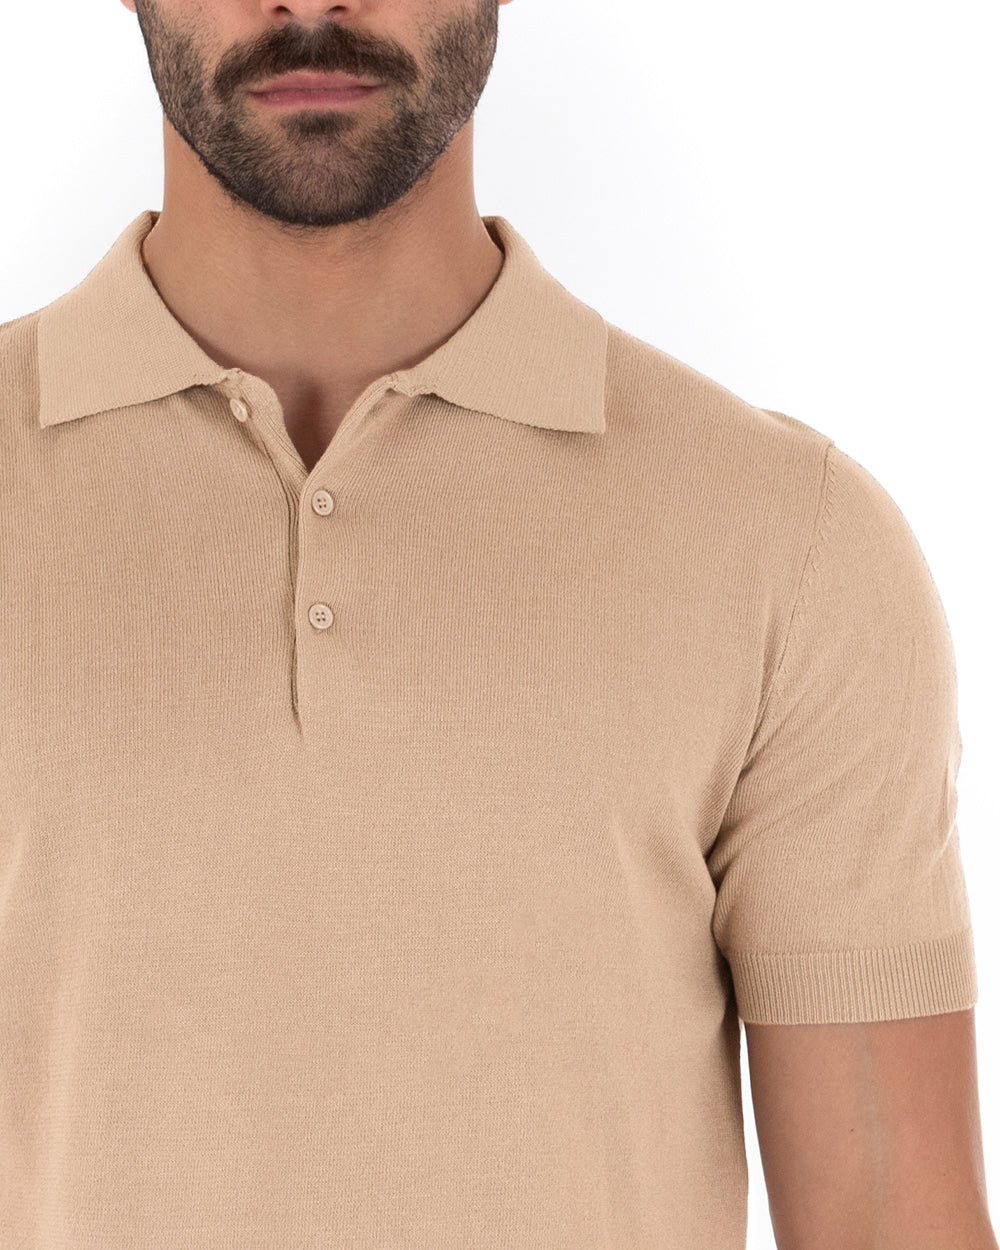 Polo T-Shirt Men Short Sleeve Solid Color Beige Casual Thread GIOSAL-TS2791A